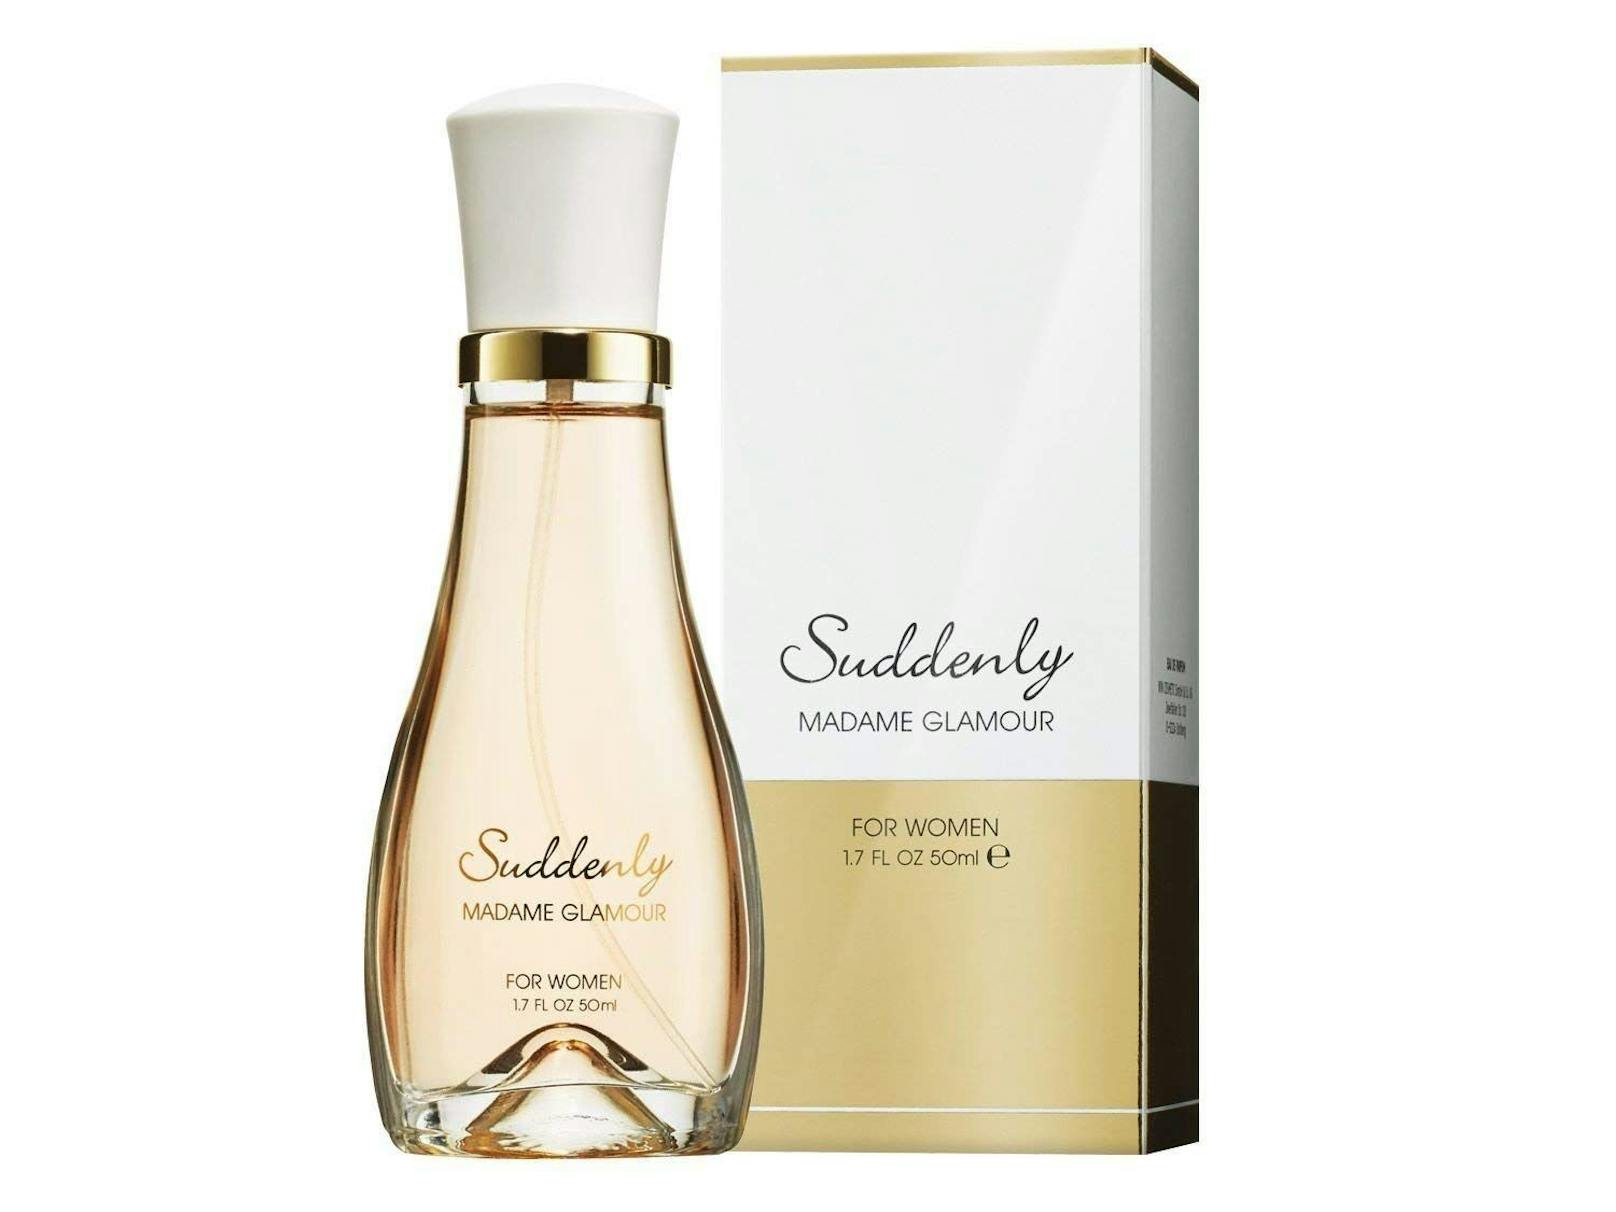 <strong>Der Duftzwilling:</strong>&nbsp;Suddenly Madame Glamour von Lidl, 50 ml, 3,49 Euro